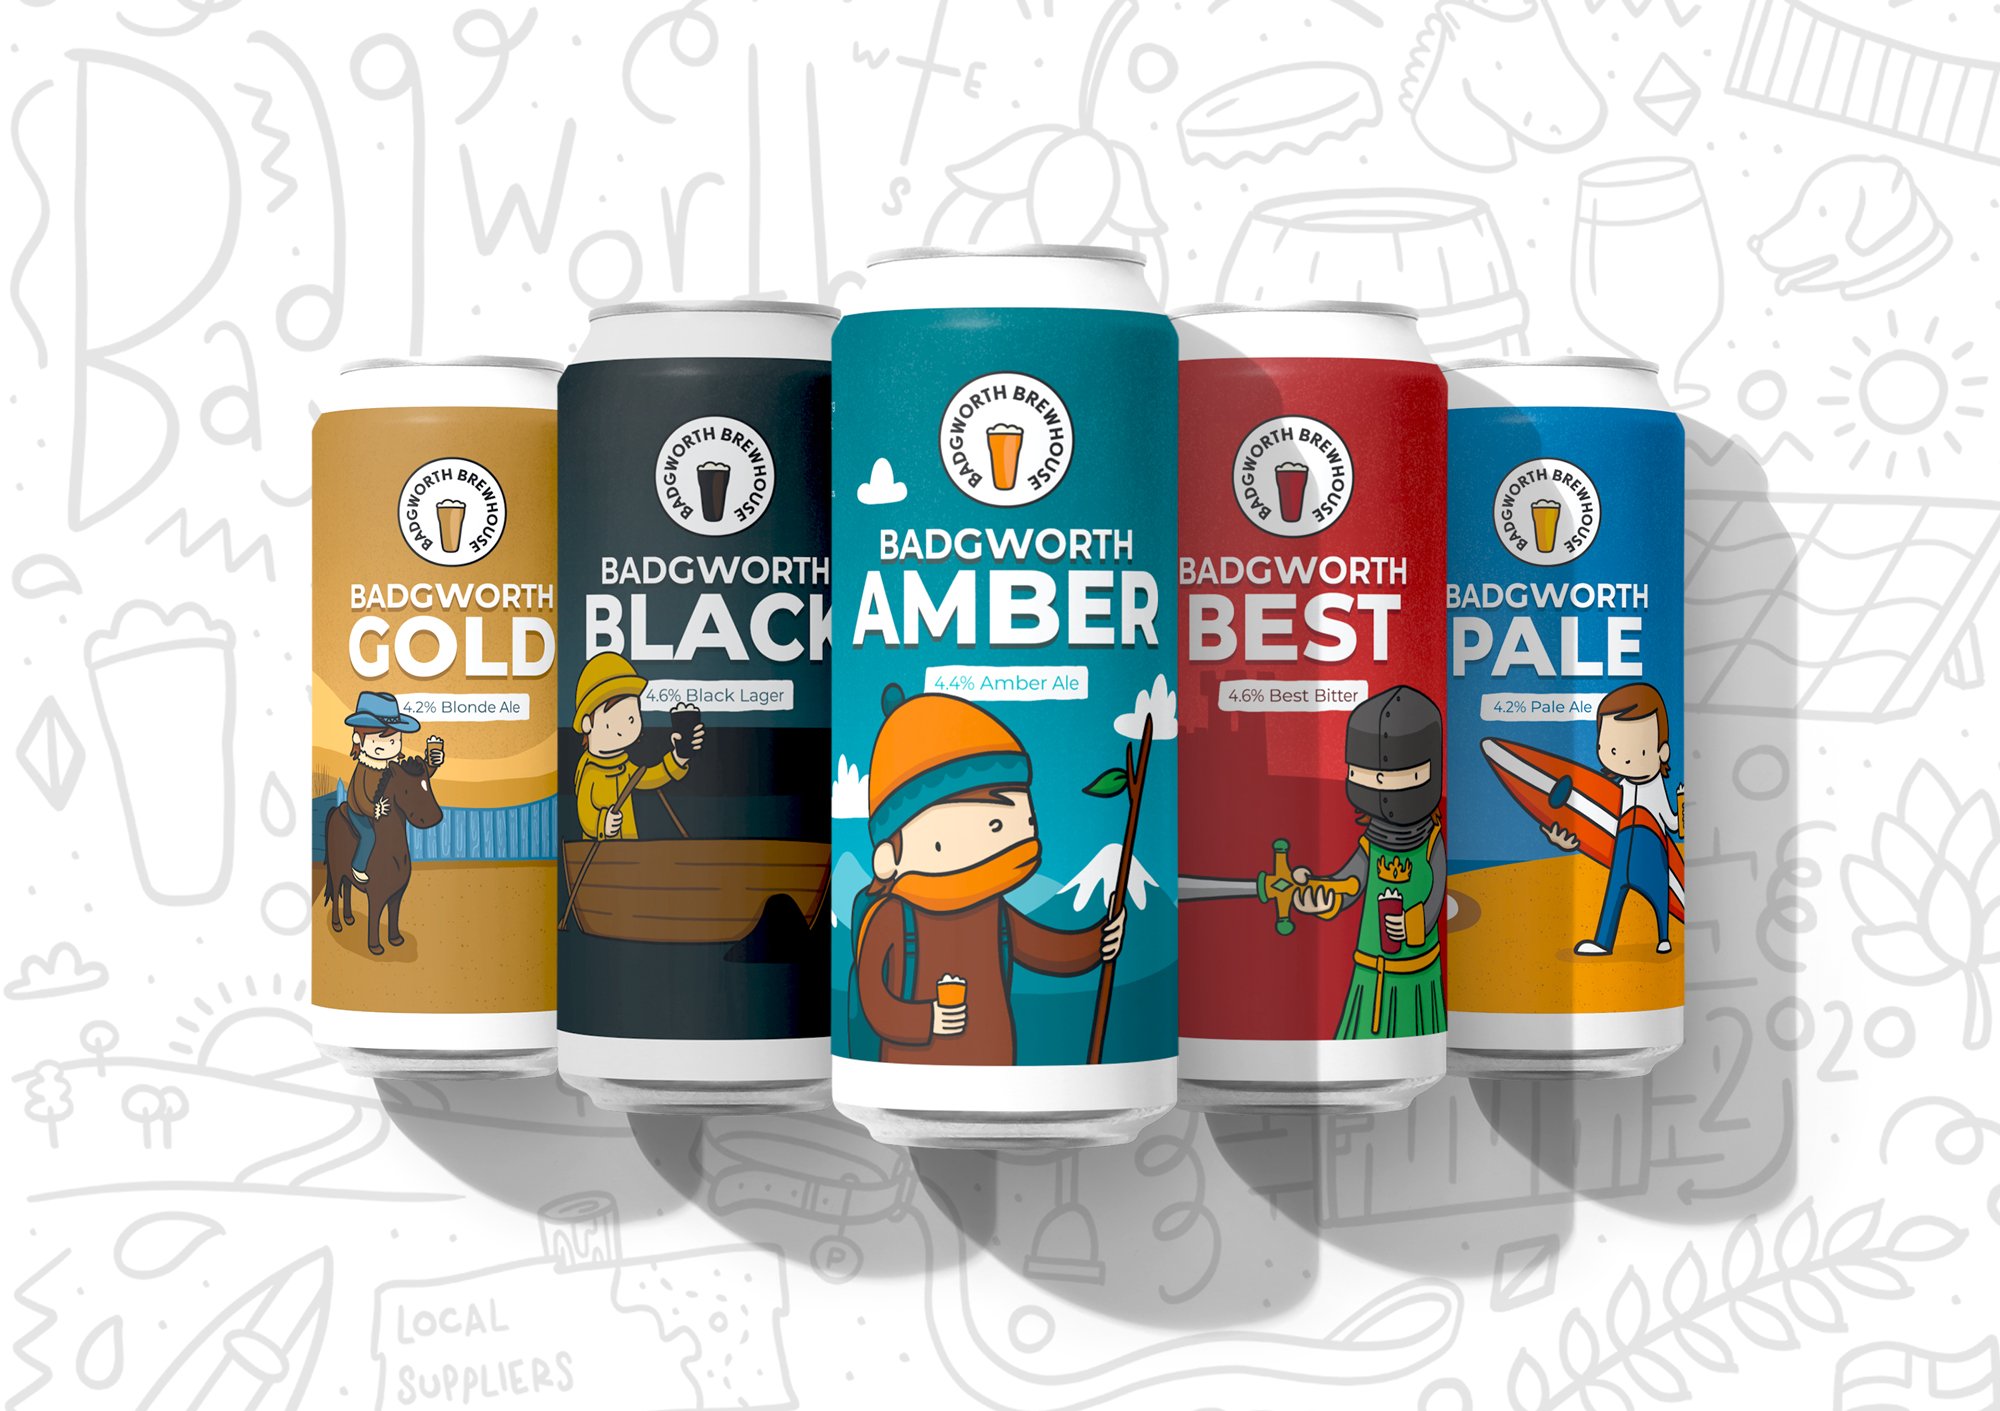 Micro-brewery illustrated product packaging design